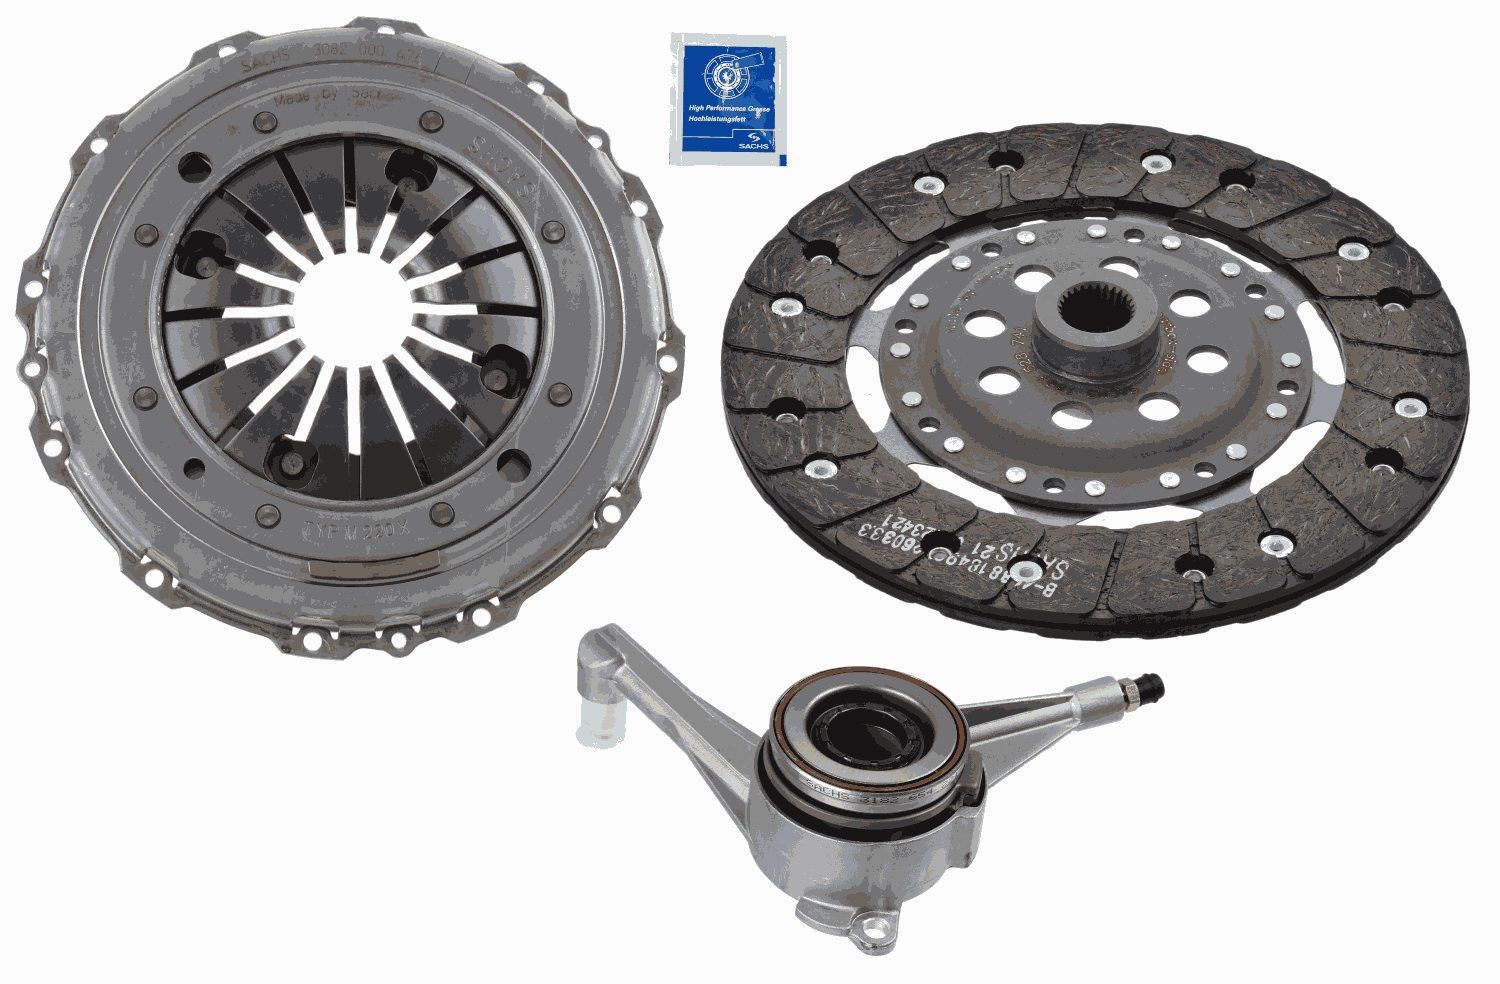 Original SACHS Clutch replacement kit 3000 990 003 for VW TRANSPORTER